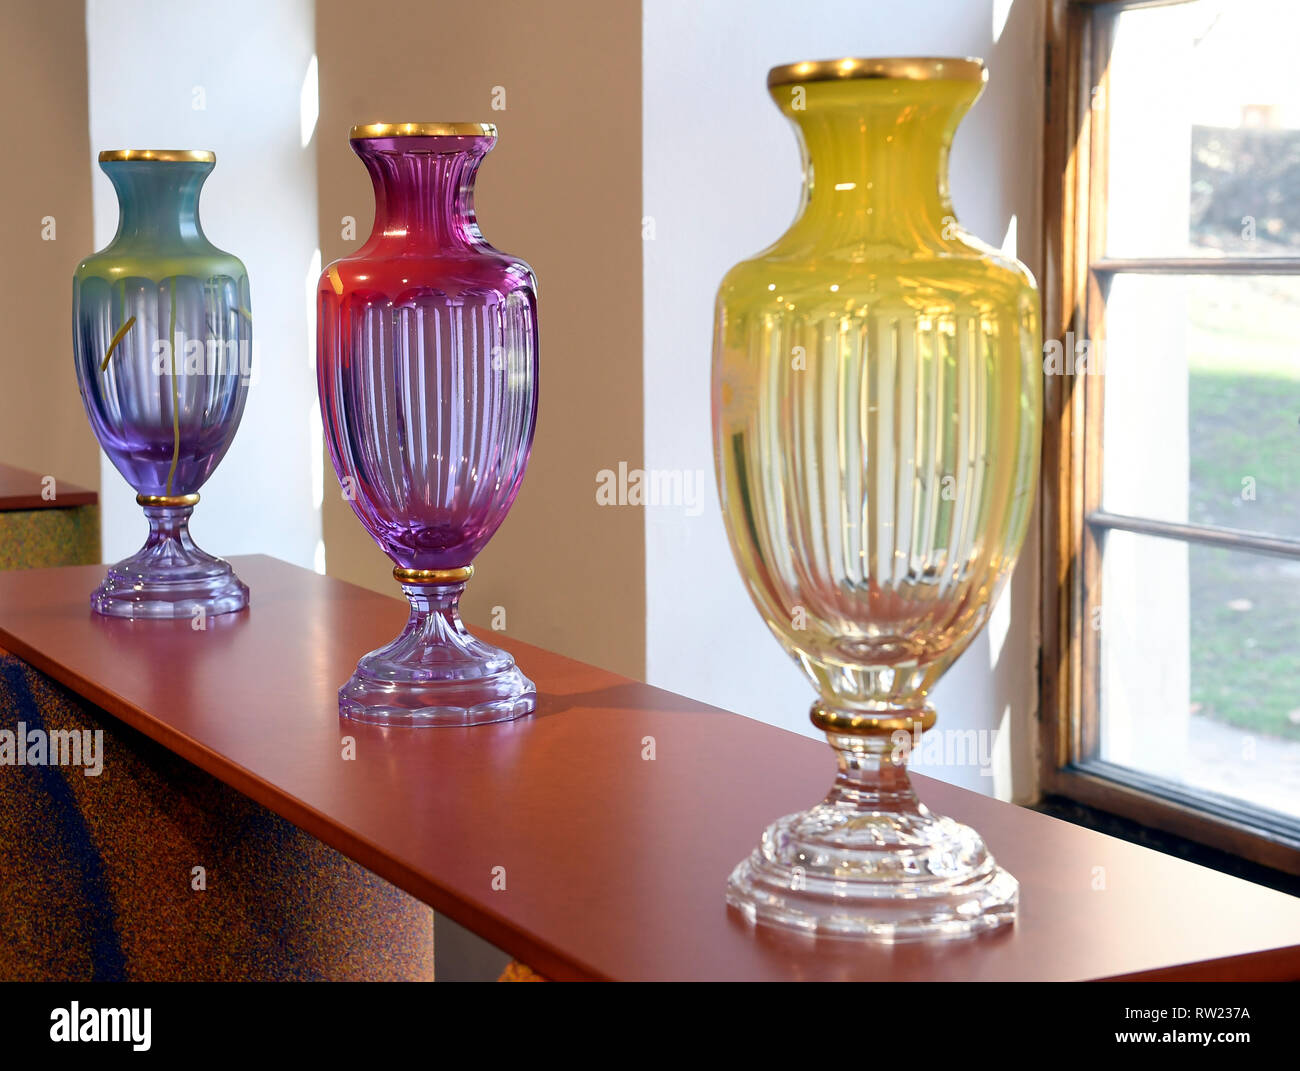 A Work By Frantisek Jungvirt Is Seen During The Fresh Colours Joint Exhibition In The Portheimka Glass Museum In Prague Czech Republic On March 4 19 One Day Prior To The